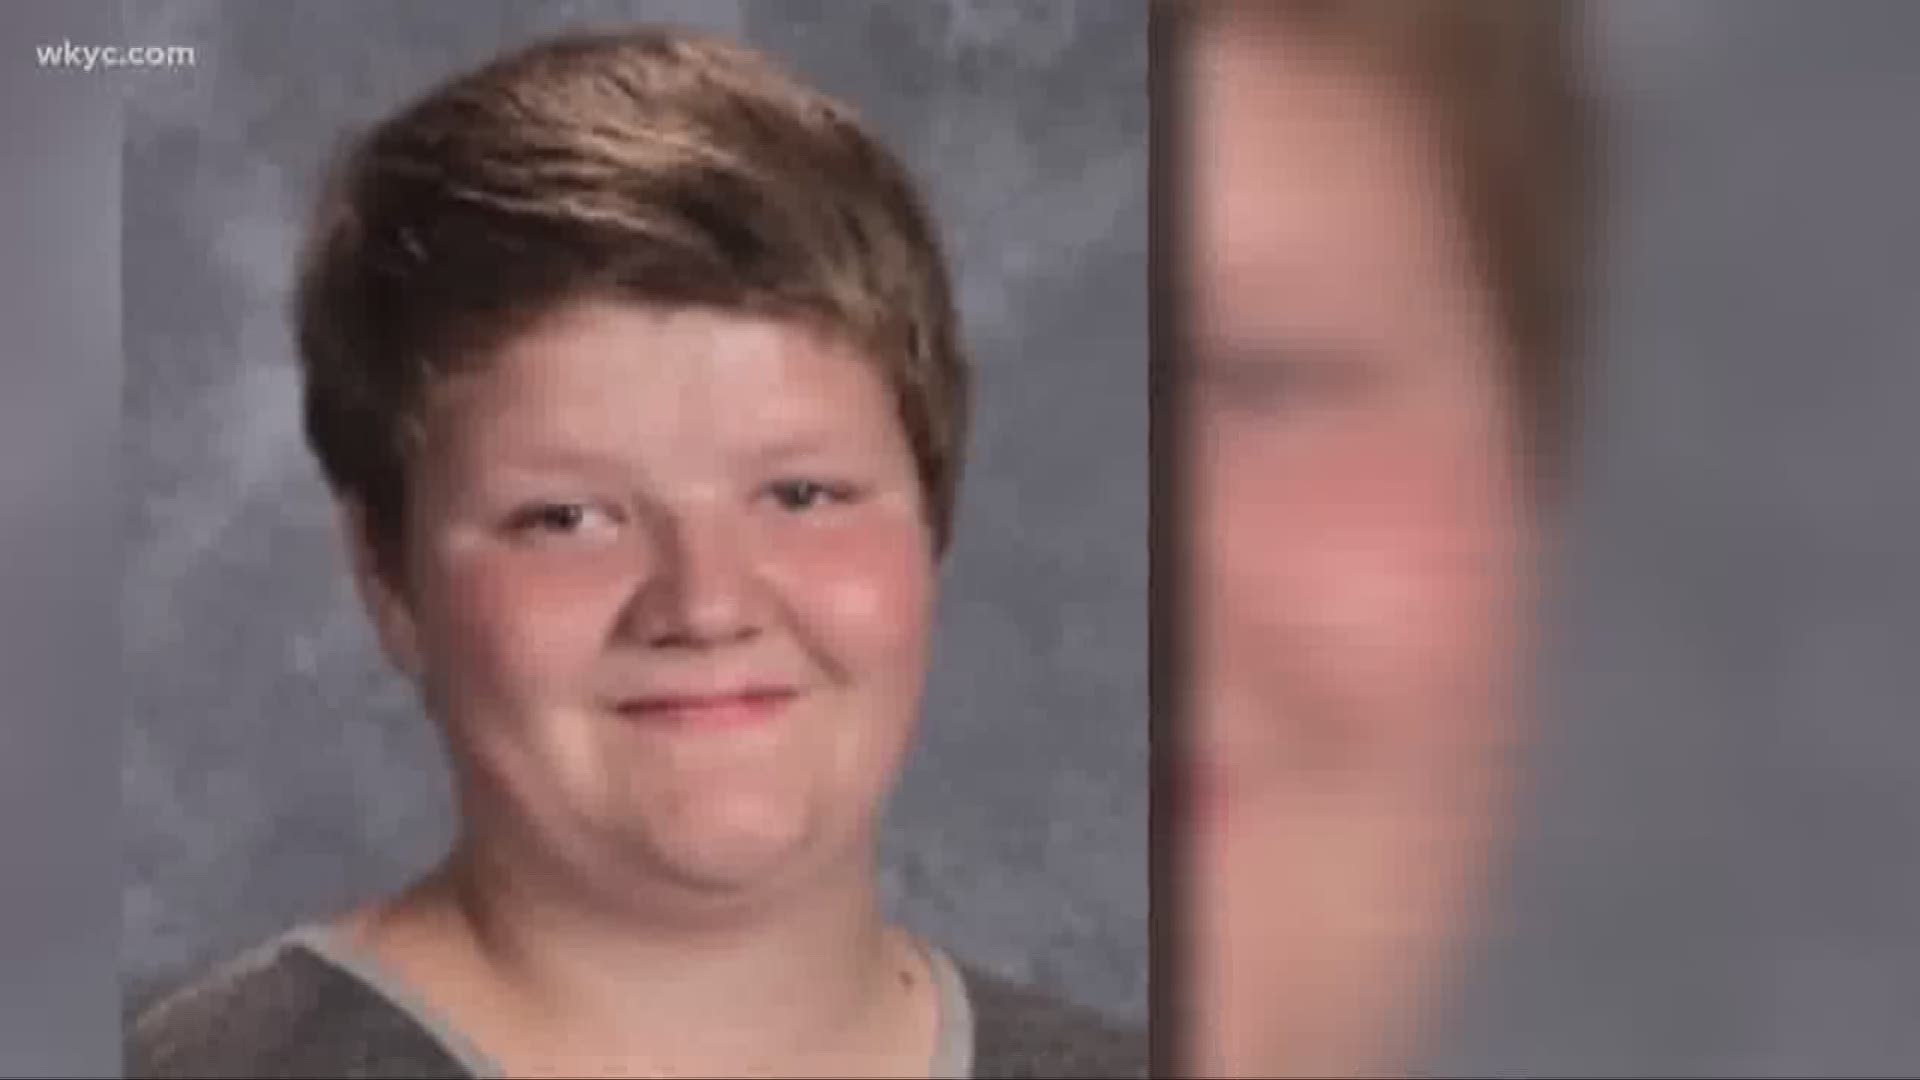 Case of missing Carroll County boy is now a criminal investigation